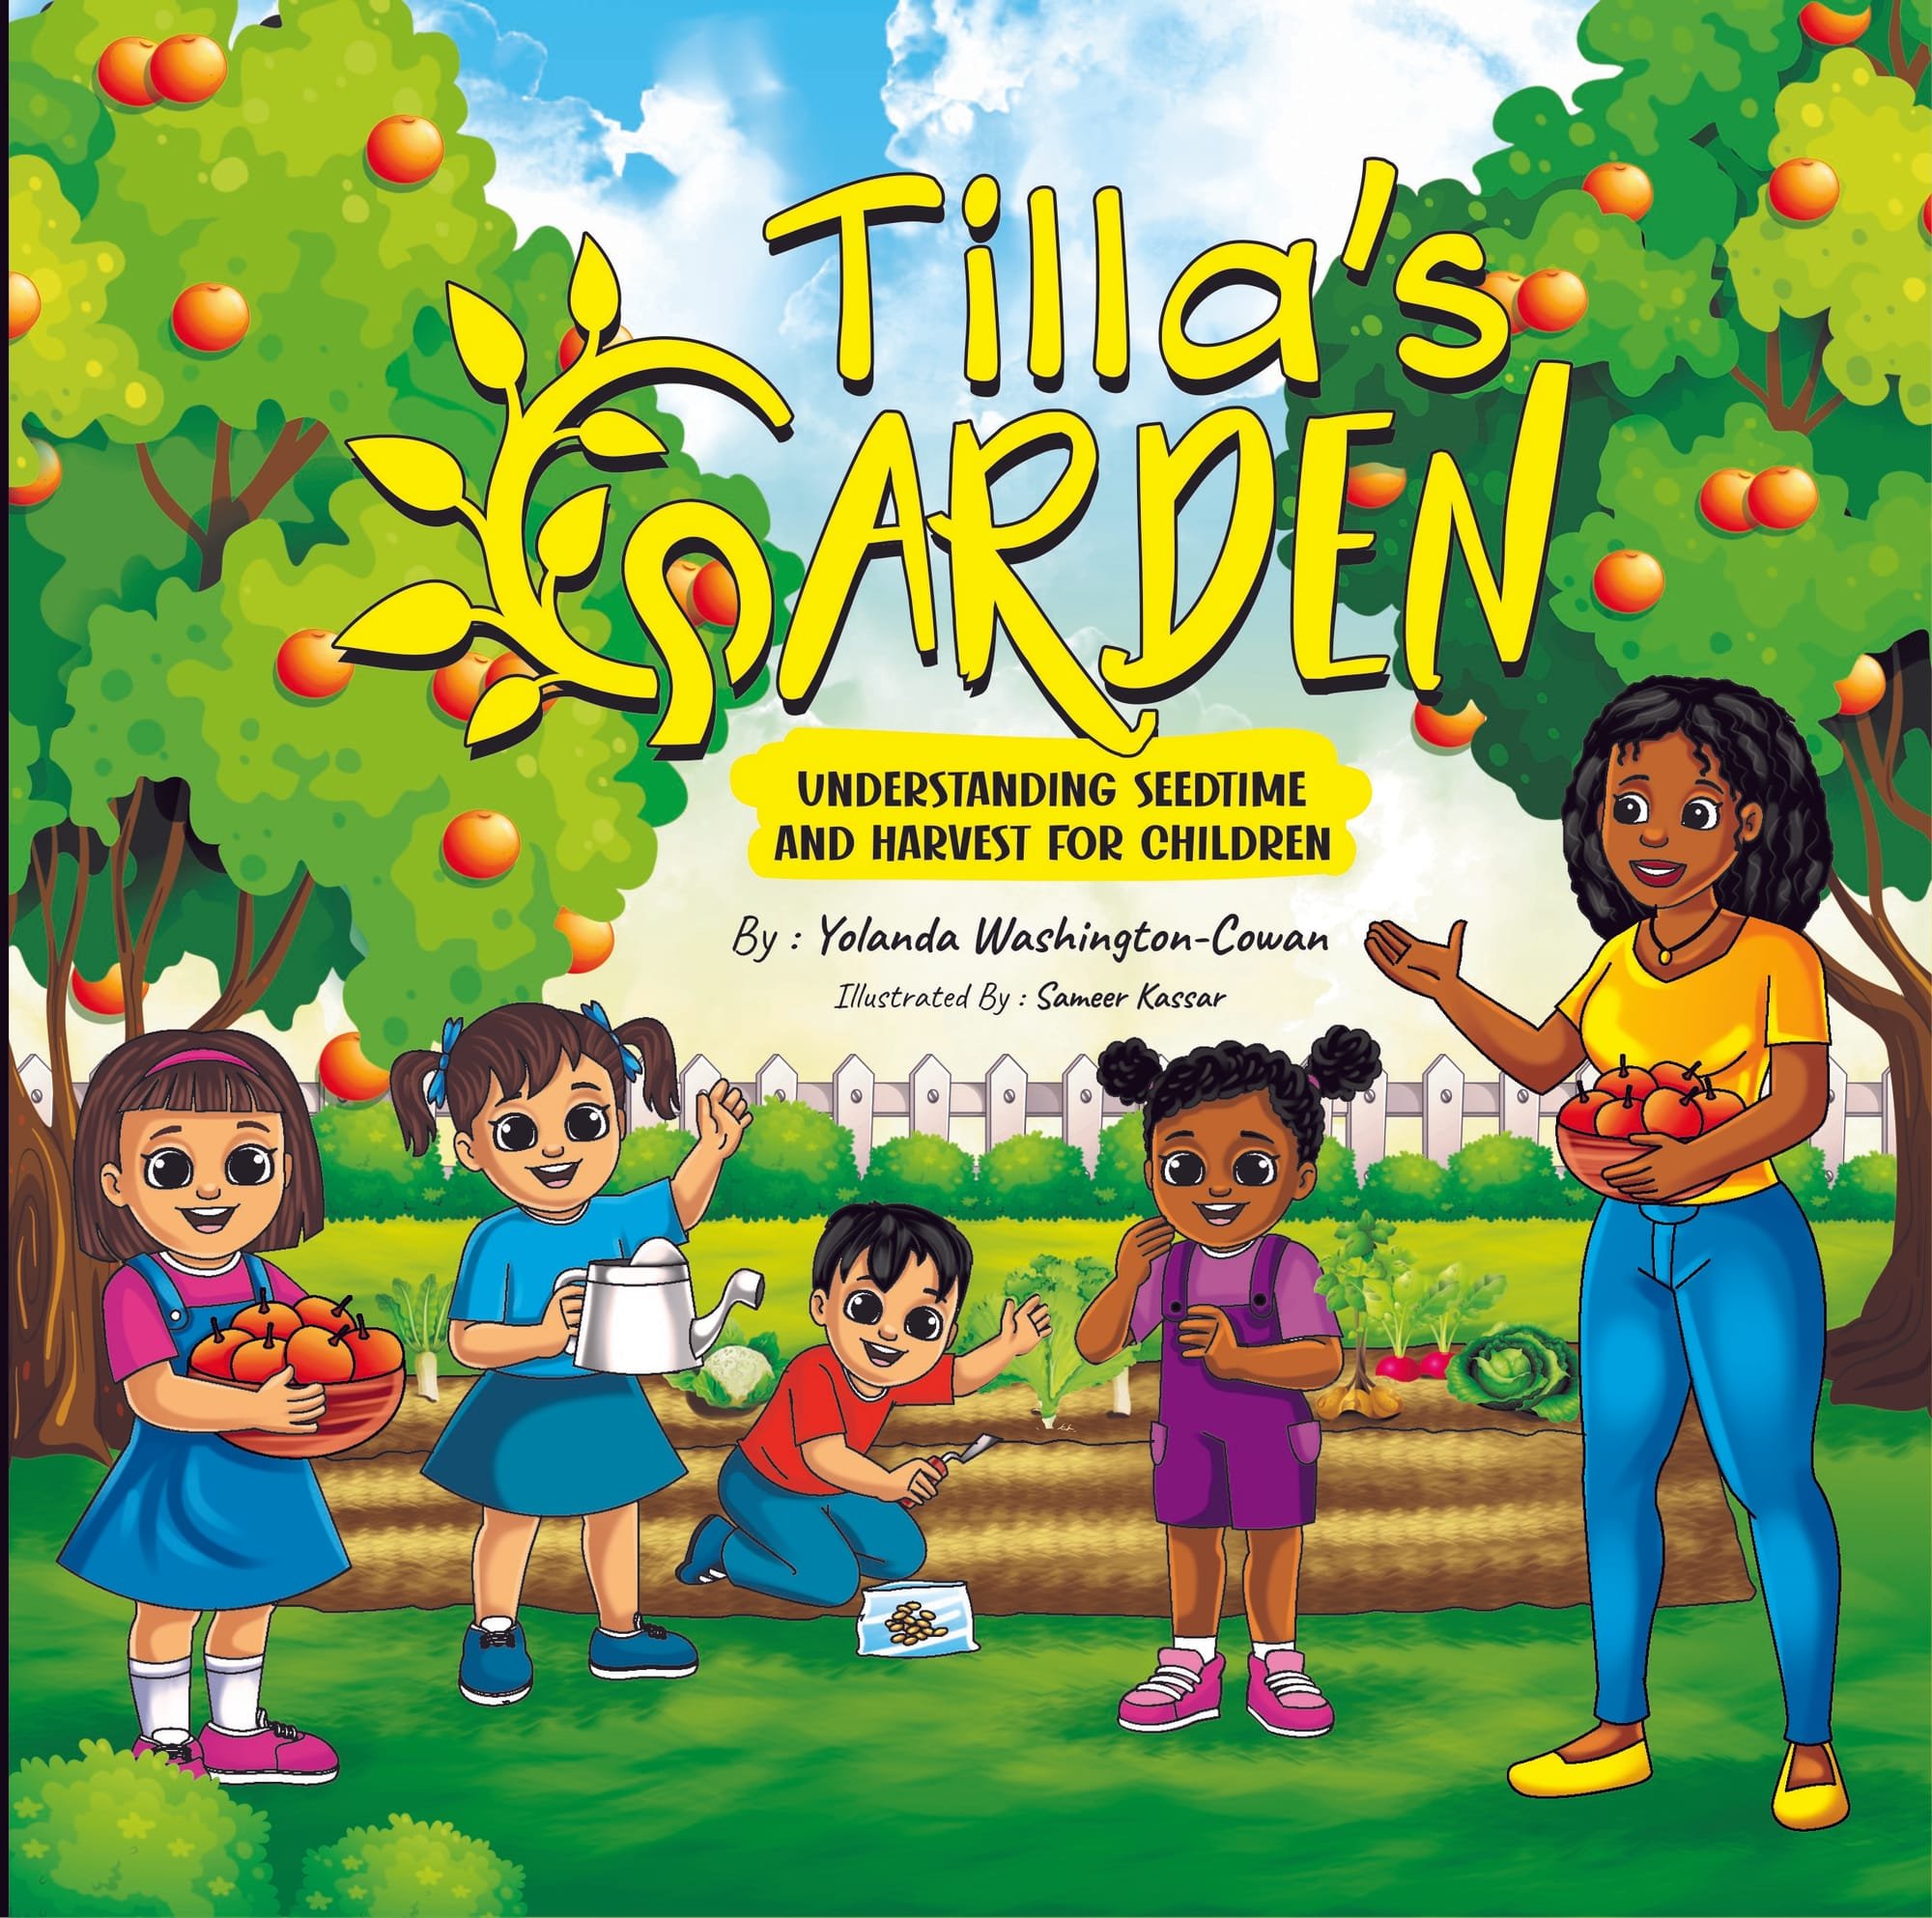 Tilla's Garden: Understanding Seedtime and Harvest for Children available in E-book, Hard Copy and Audible